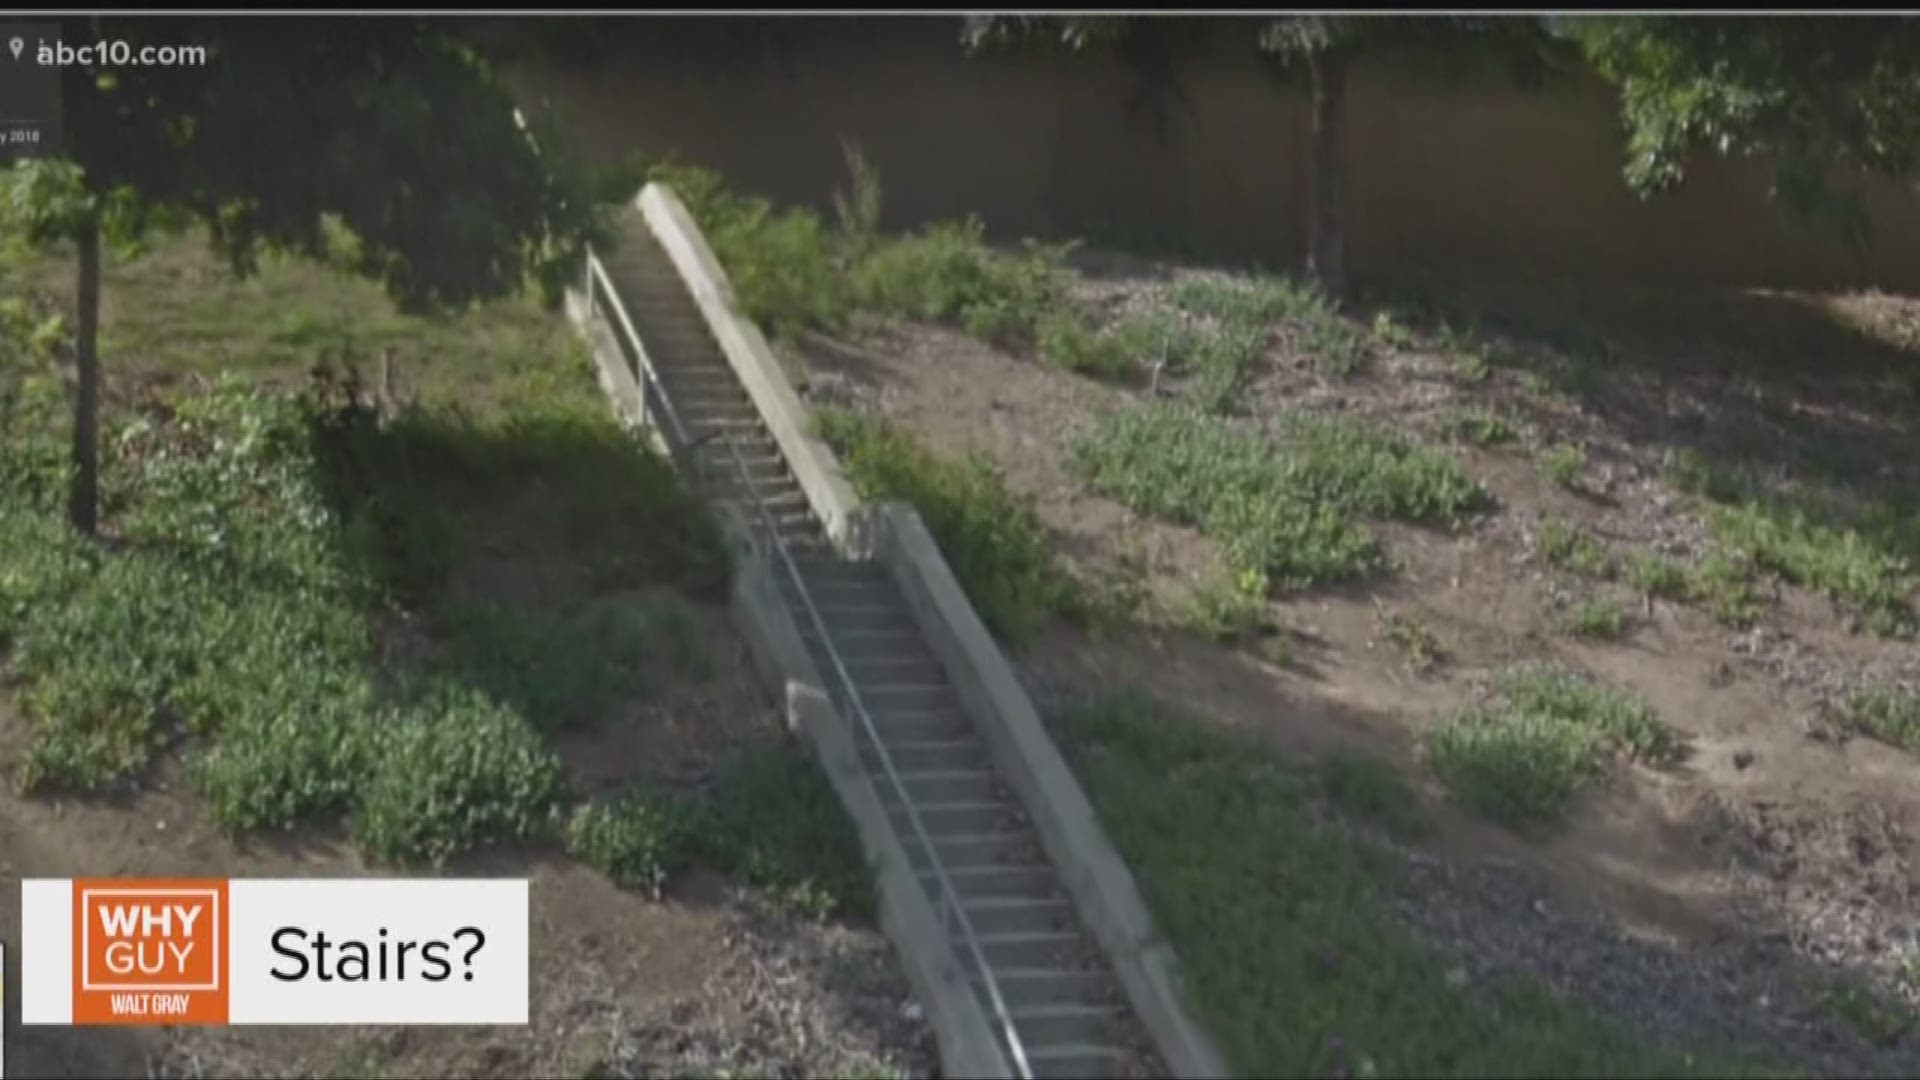 As you cruise along the highway in Stockton, there are multiple staircases that lead from the highway shoulder straight up to the top of the walled embankments.